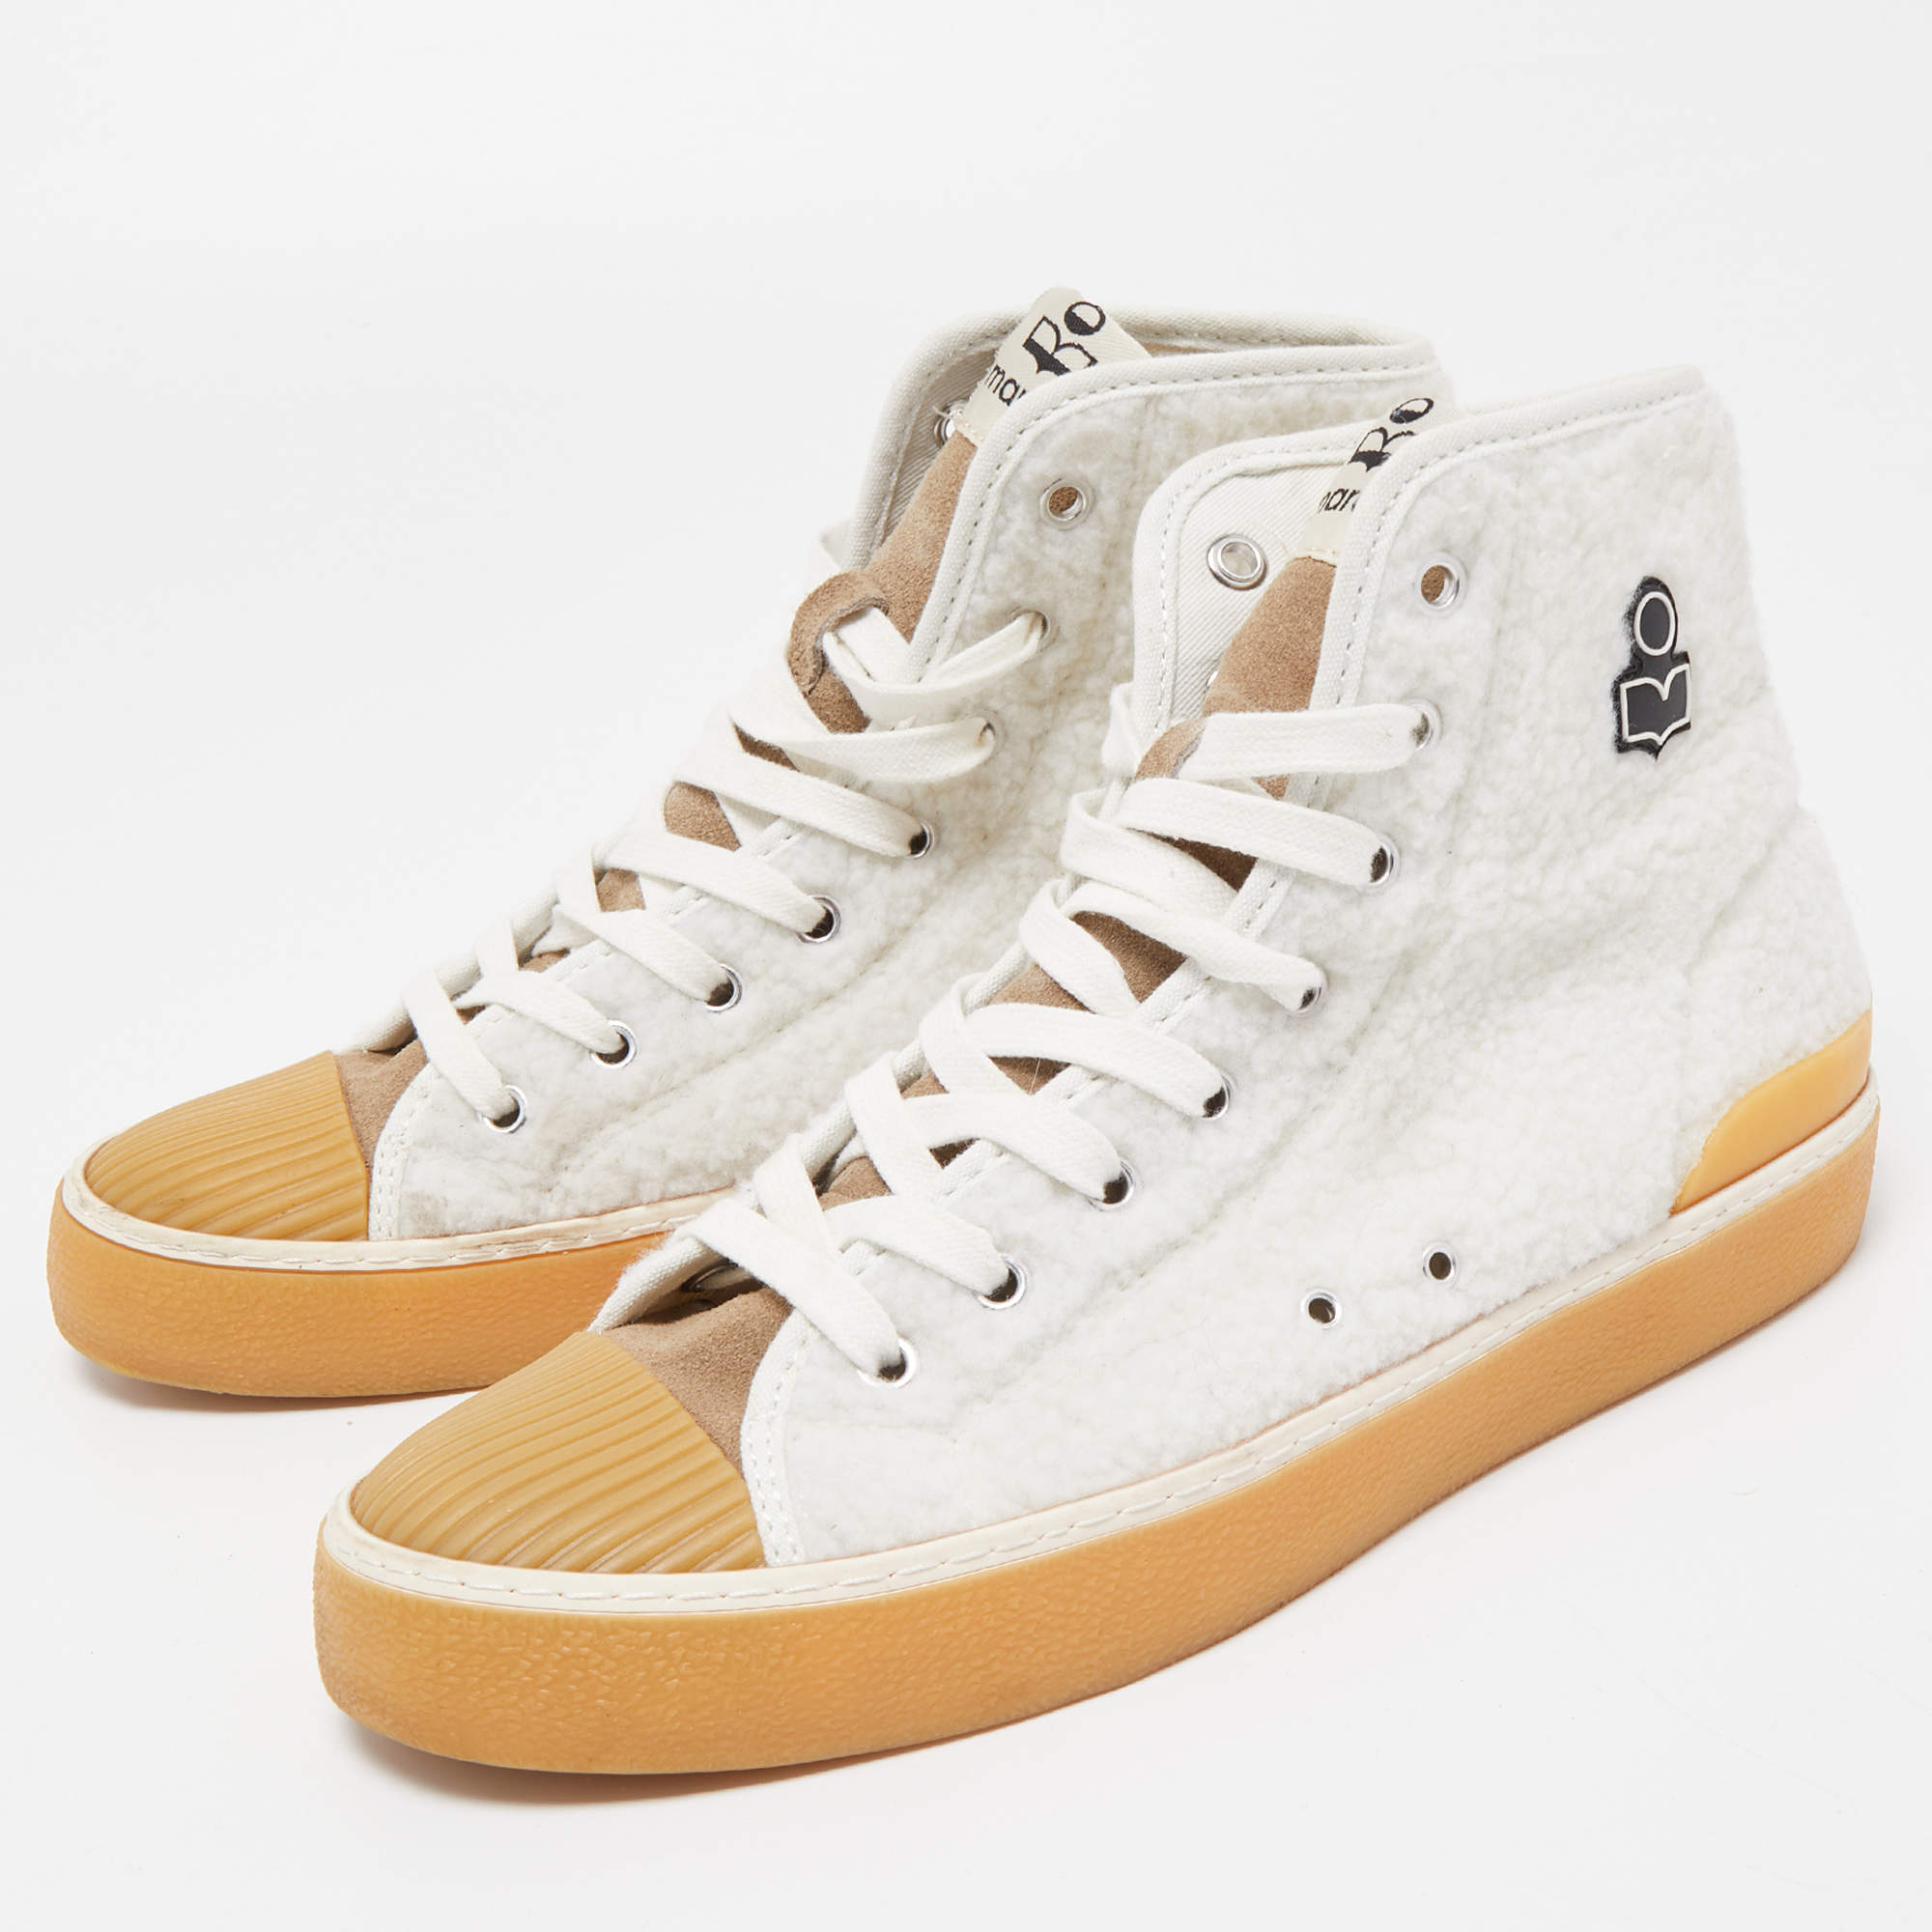 Isabel Marant White/Beige Wool and Suede High Top Sneakers Size Isabel Marant | TLC